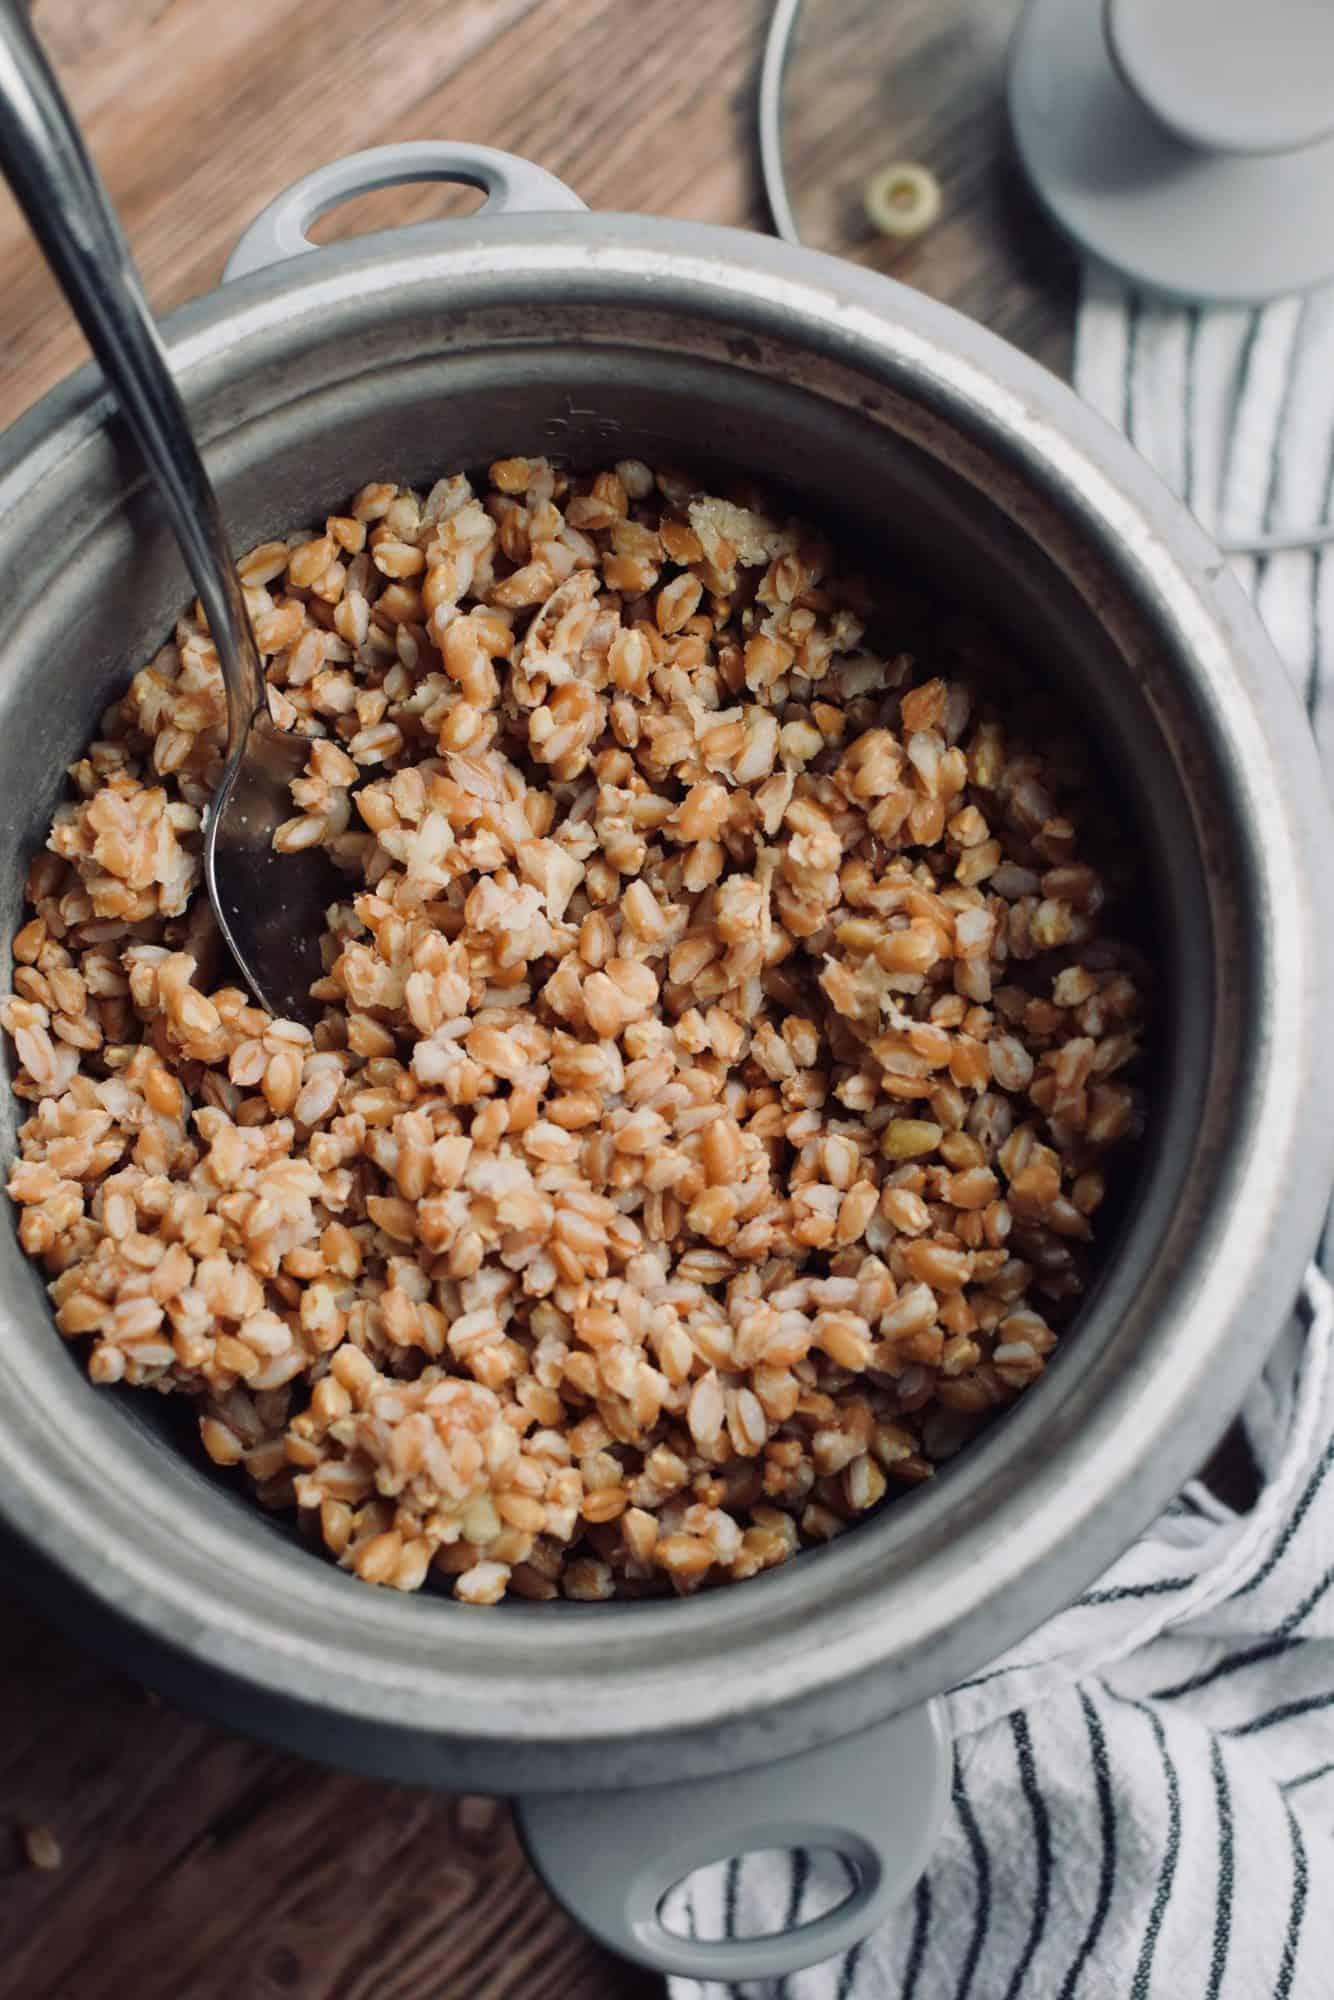 A rice cooker full of farro. A spoon is dishing some out